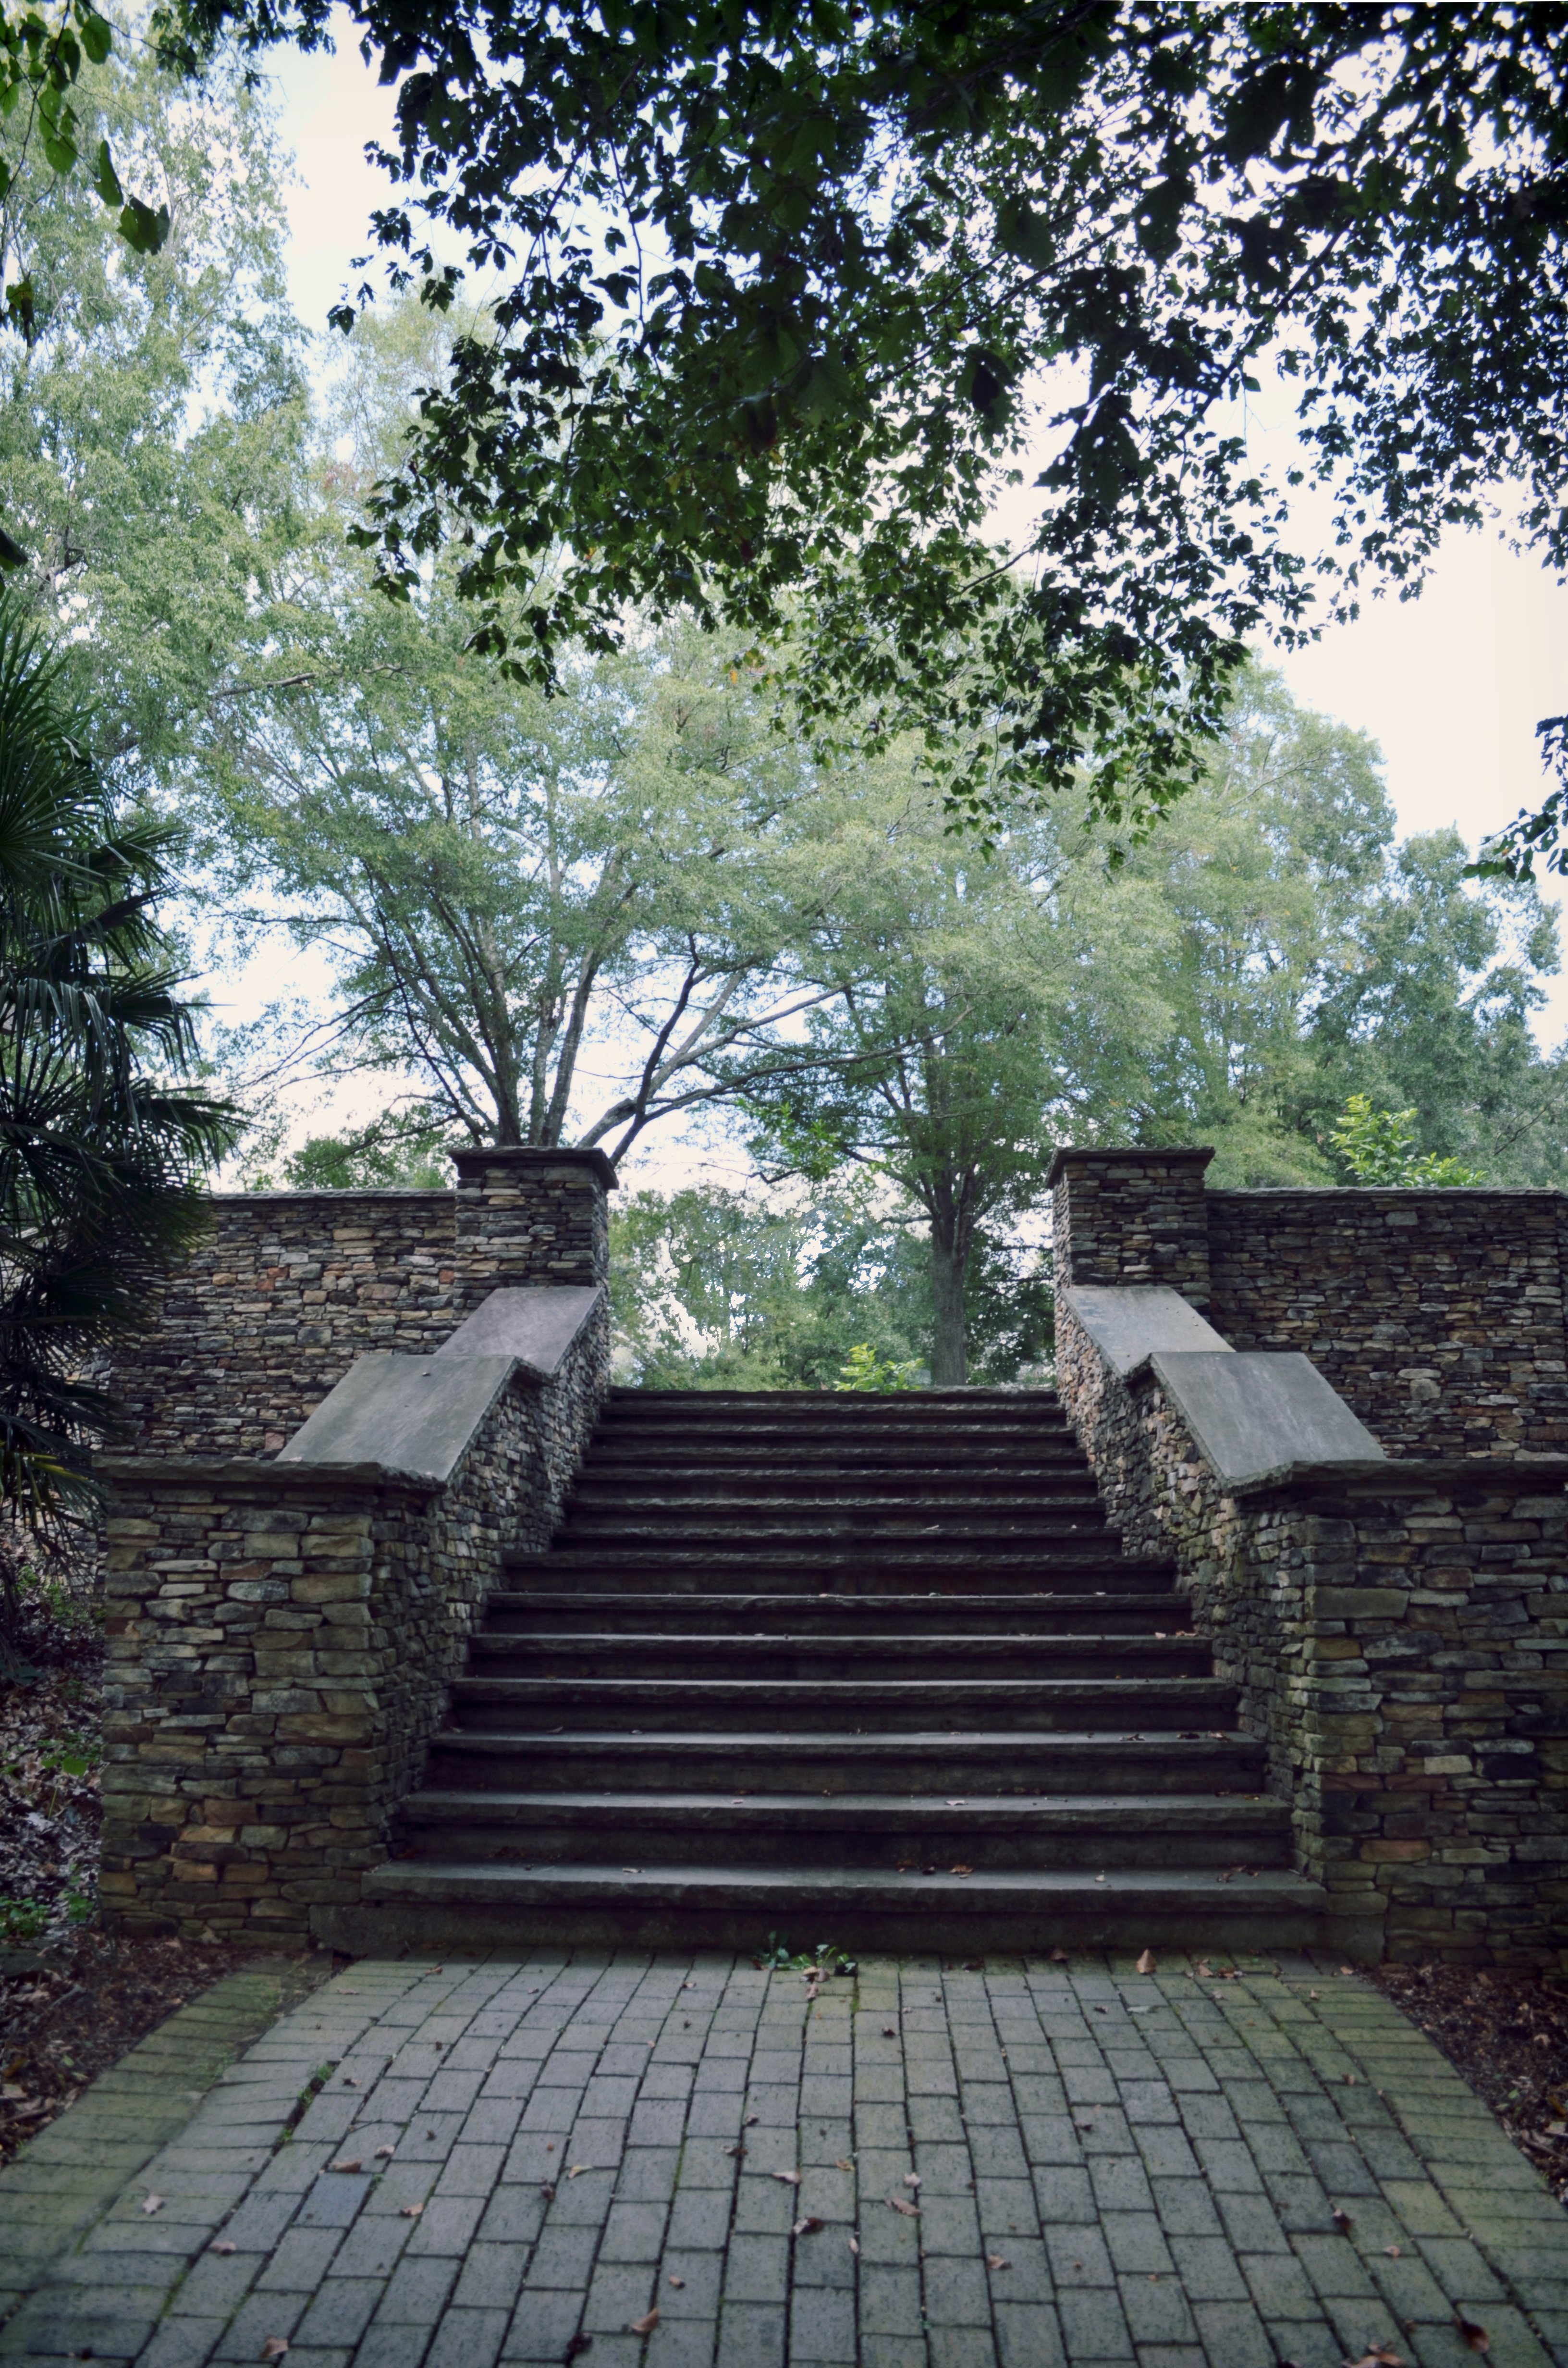 Stone Staircase Park Background Stock 0227 Cool by annamae22 on DeviantArt